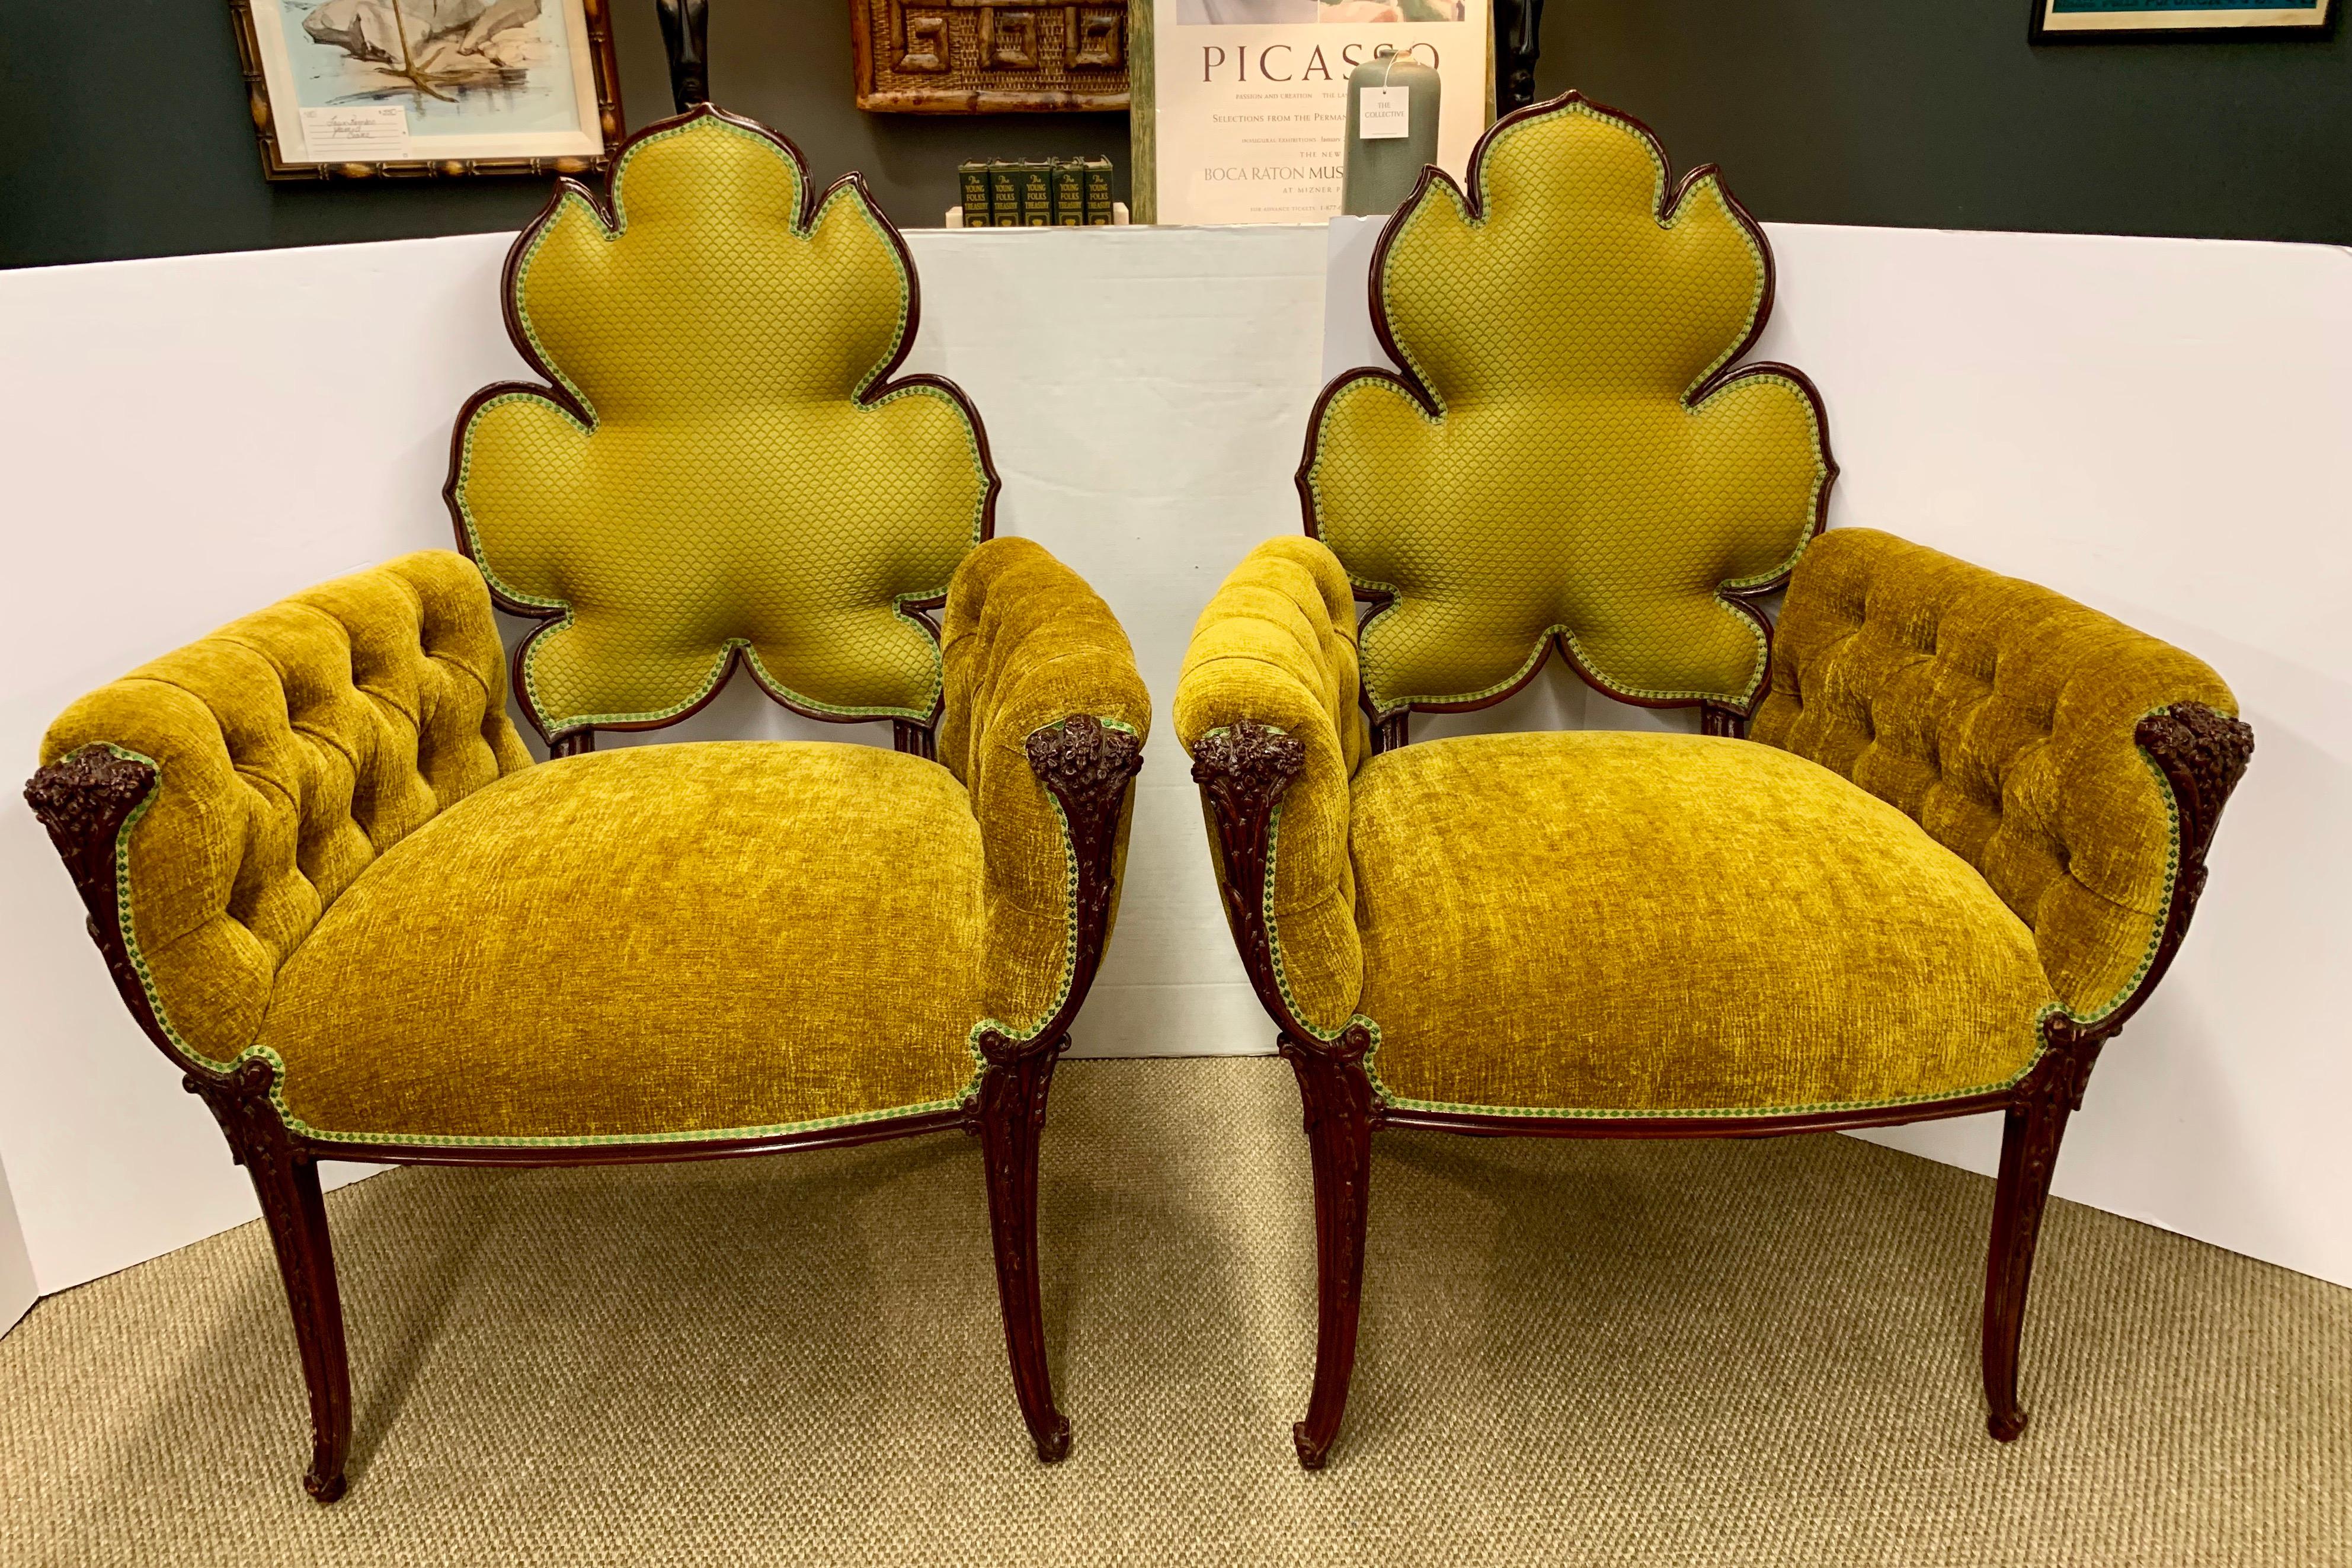 Uniquely shaped 1950s matching armchairs with golden velvet upholstery, mahogany wood and maple leaf shaped backrest. One of a kind look.